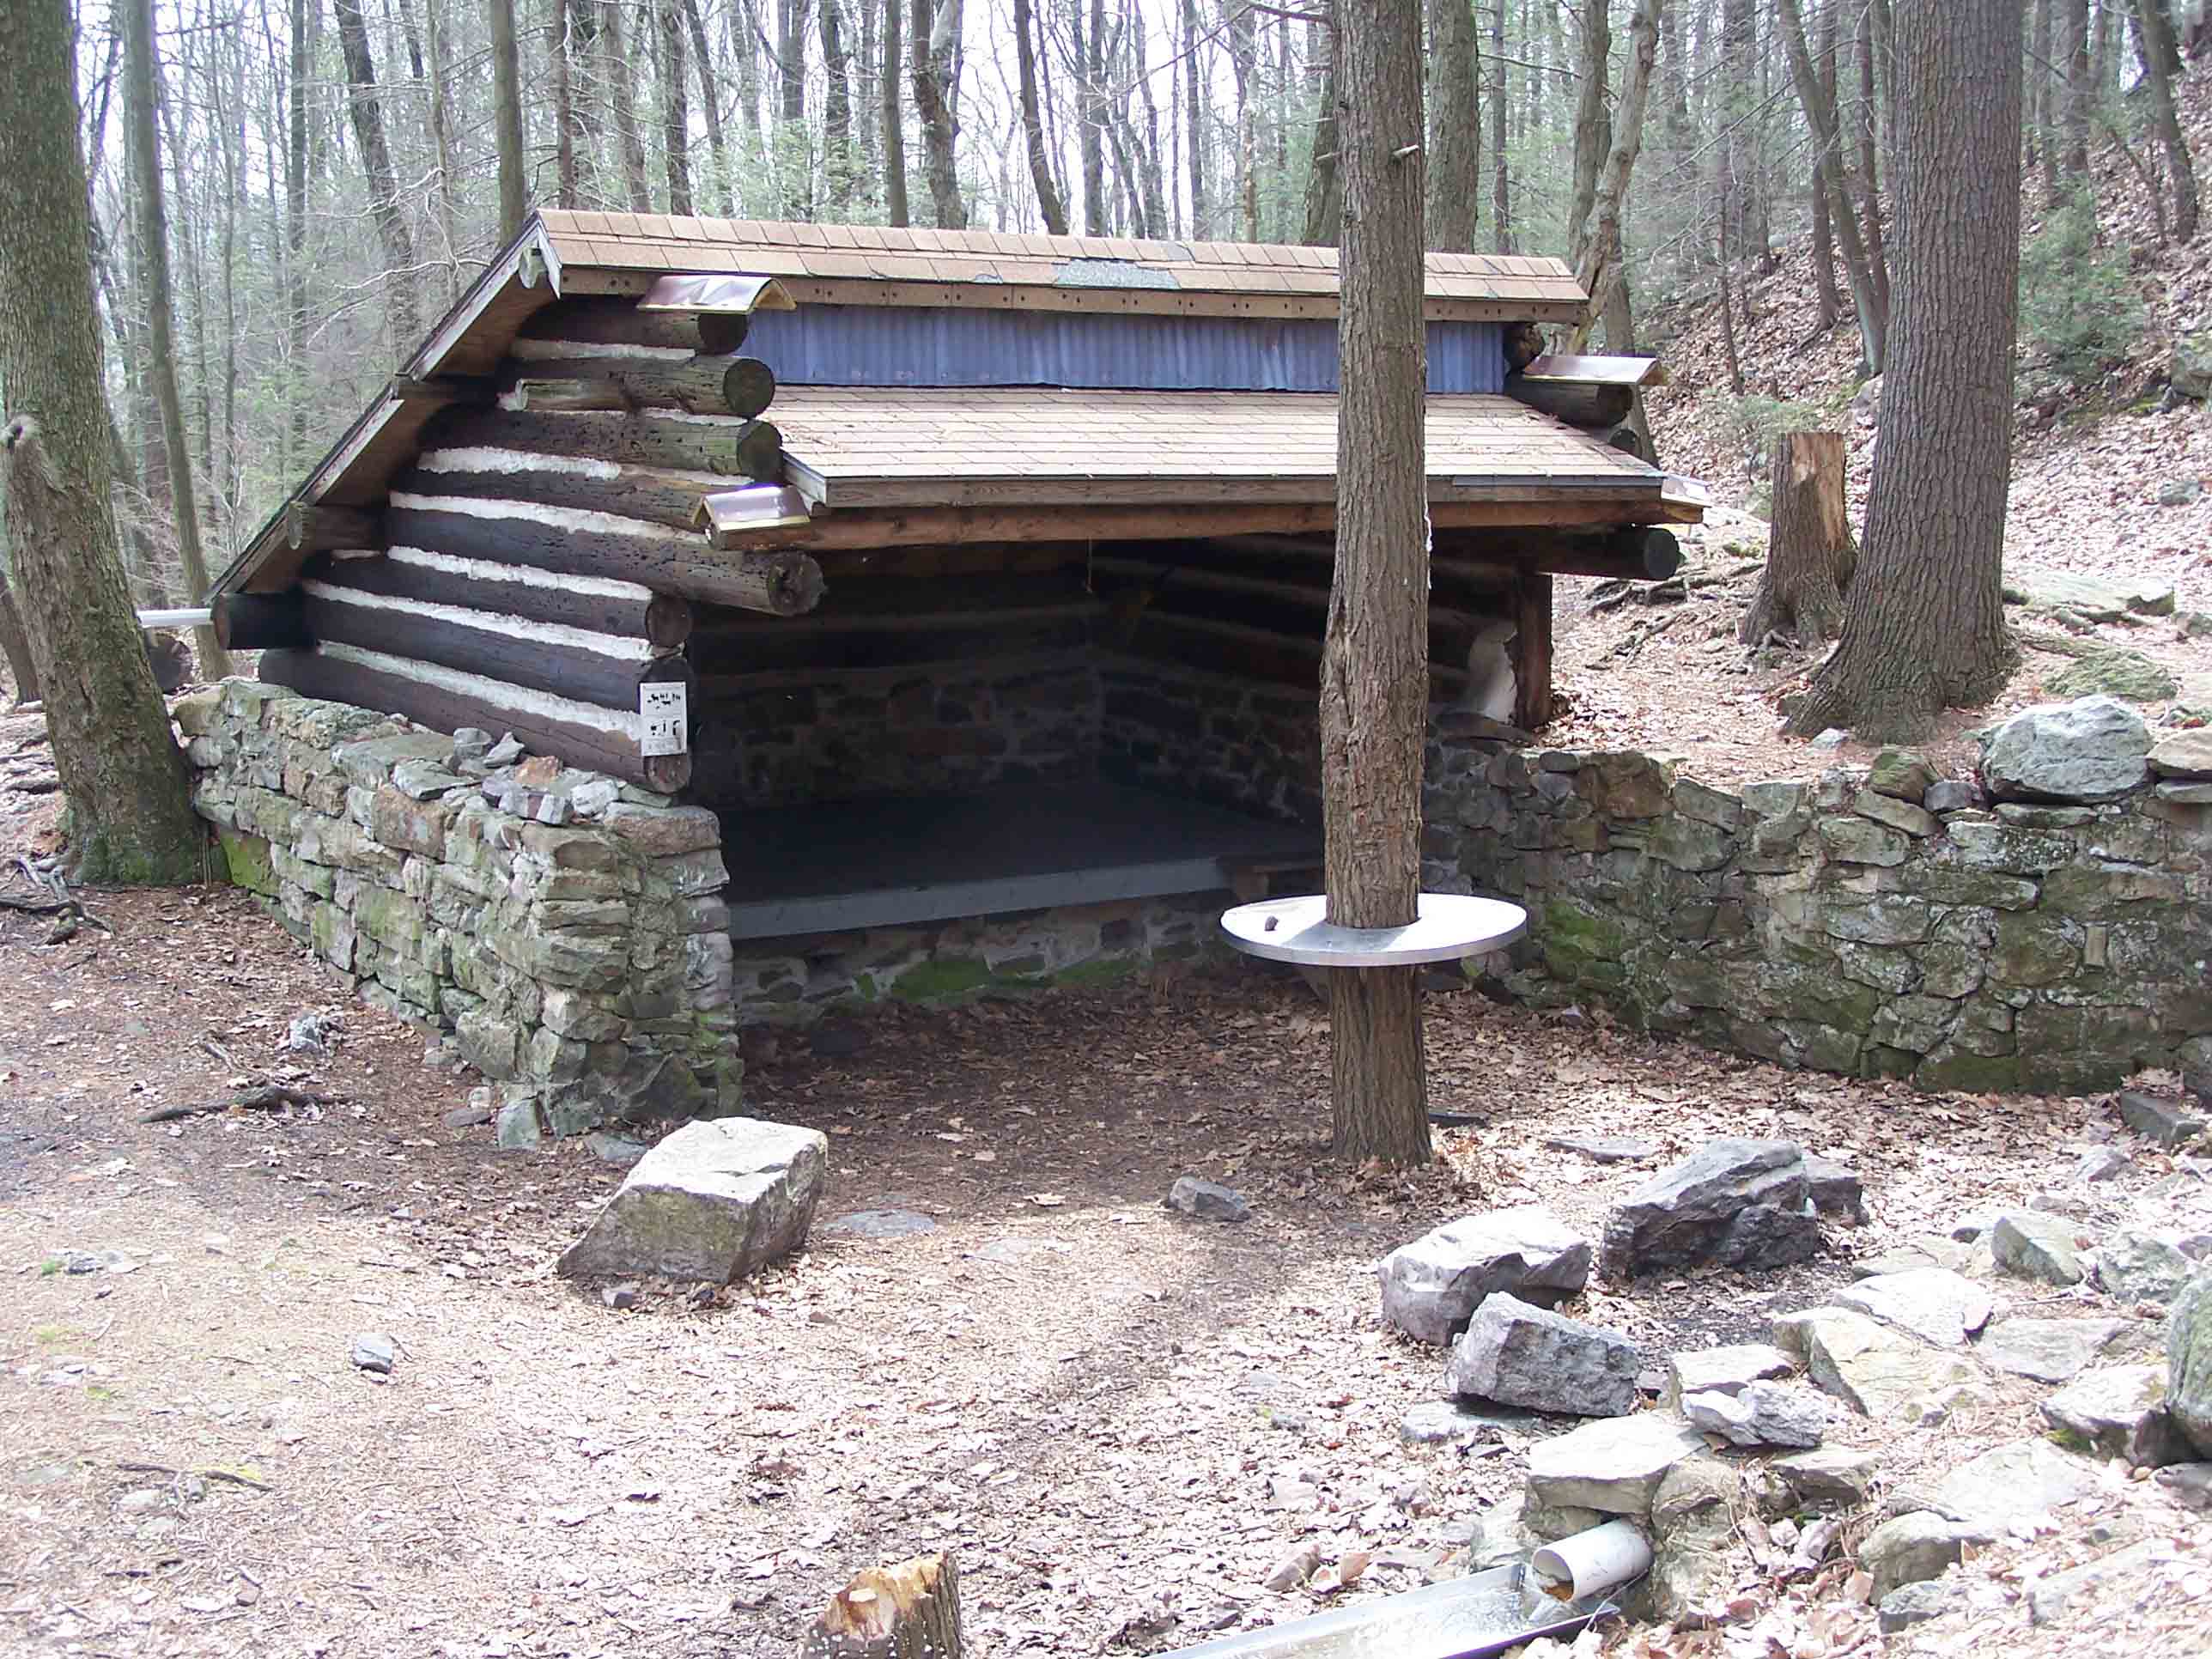 mm 6.1 - Rausch Gap Shelter. Courtesy at@rohland.org